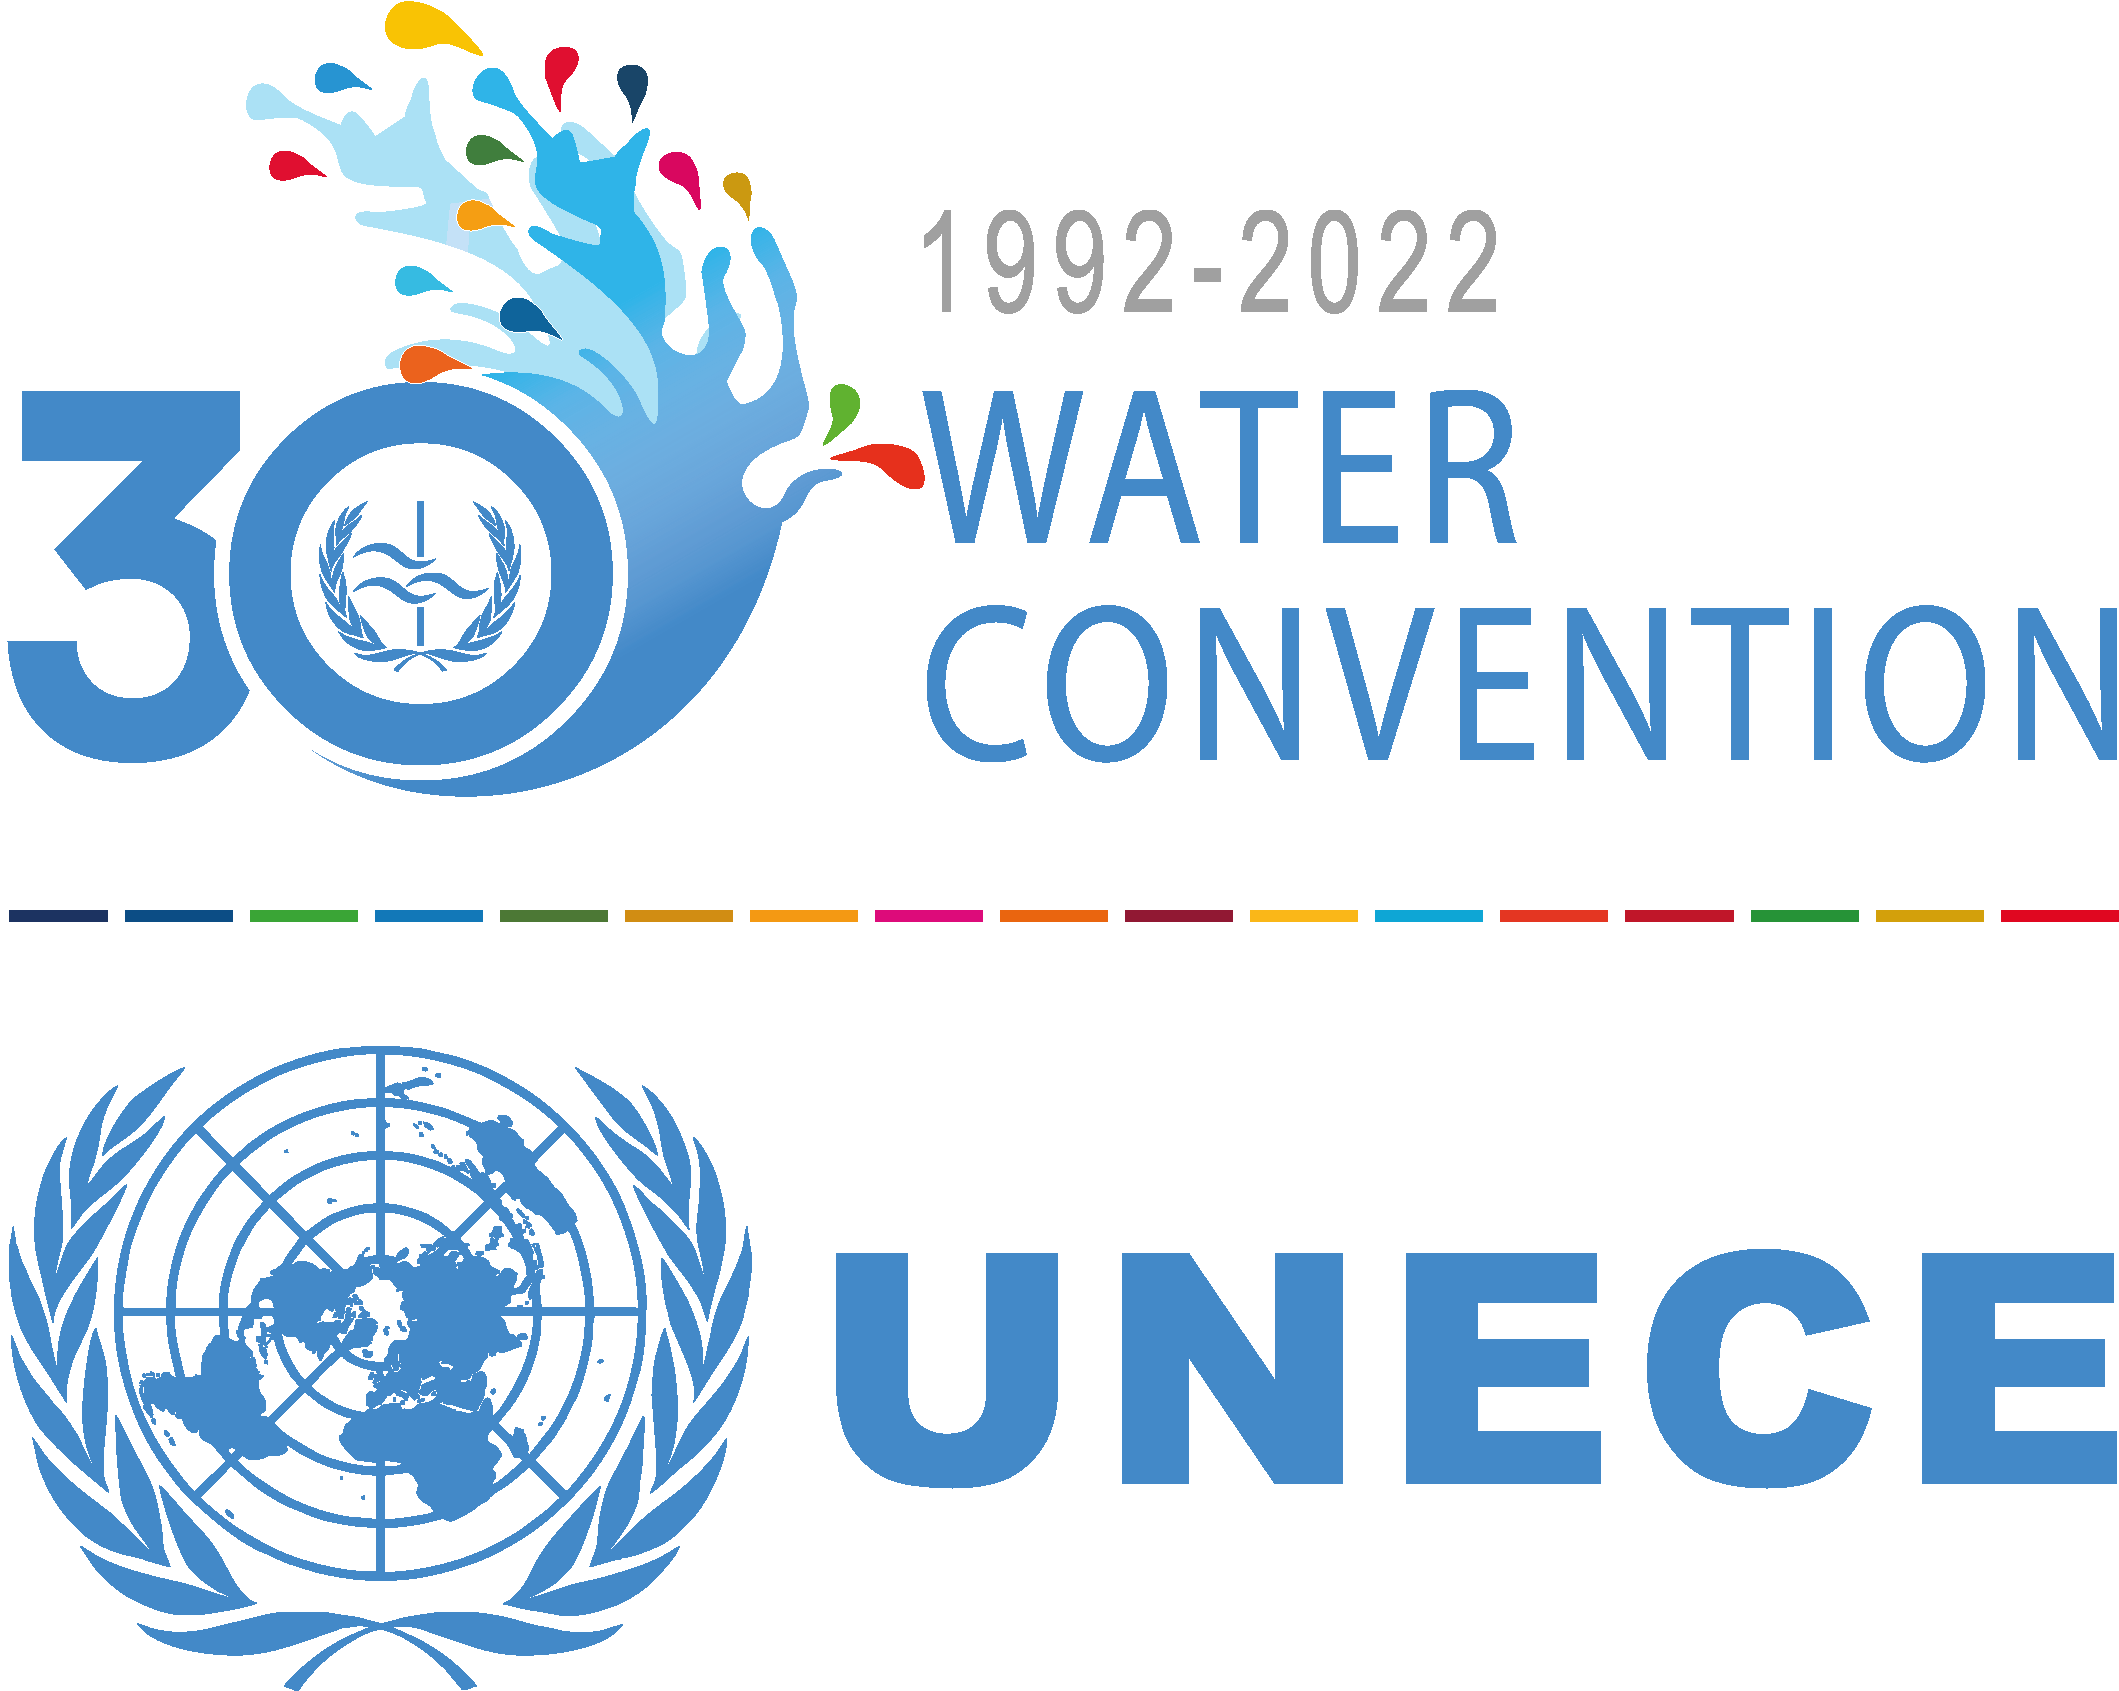 30th Anniversary of the Water Convention